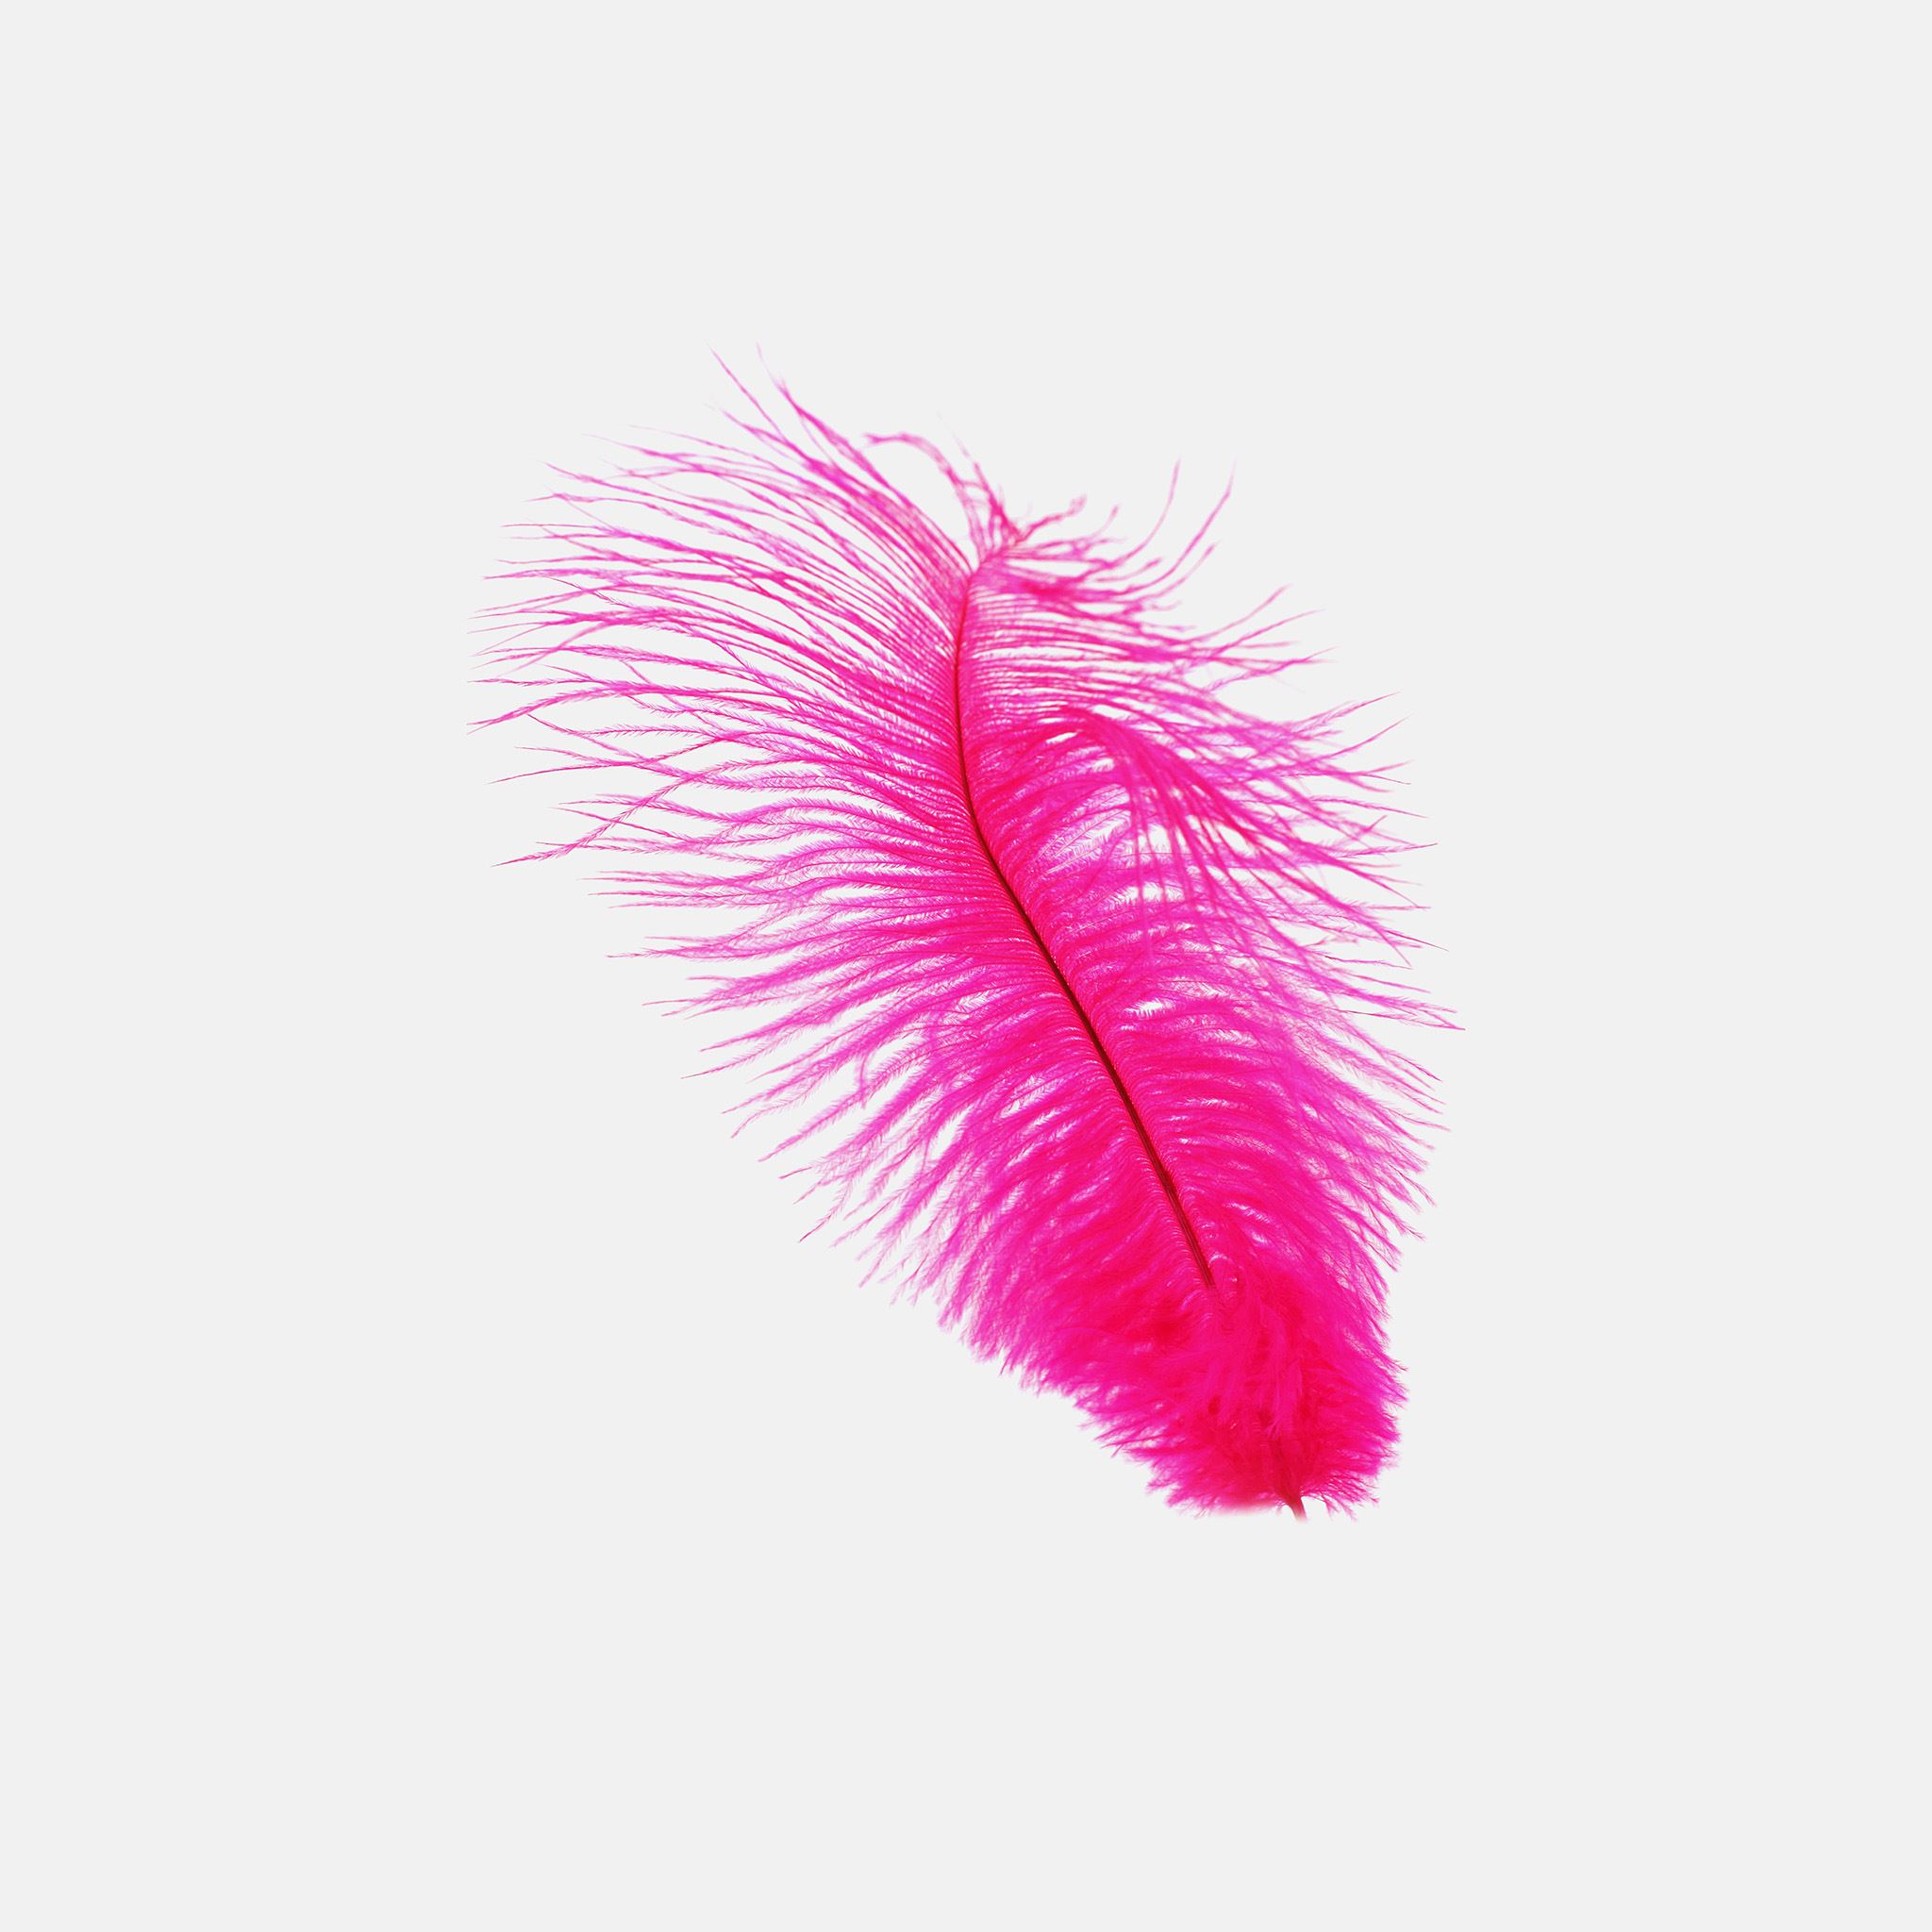 Feather Pink White Nature Minimal iPad Air wallpaper 